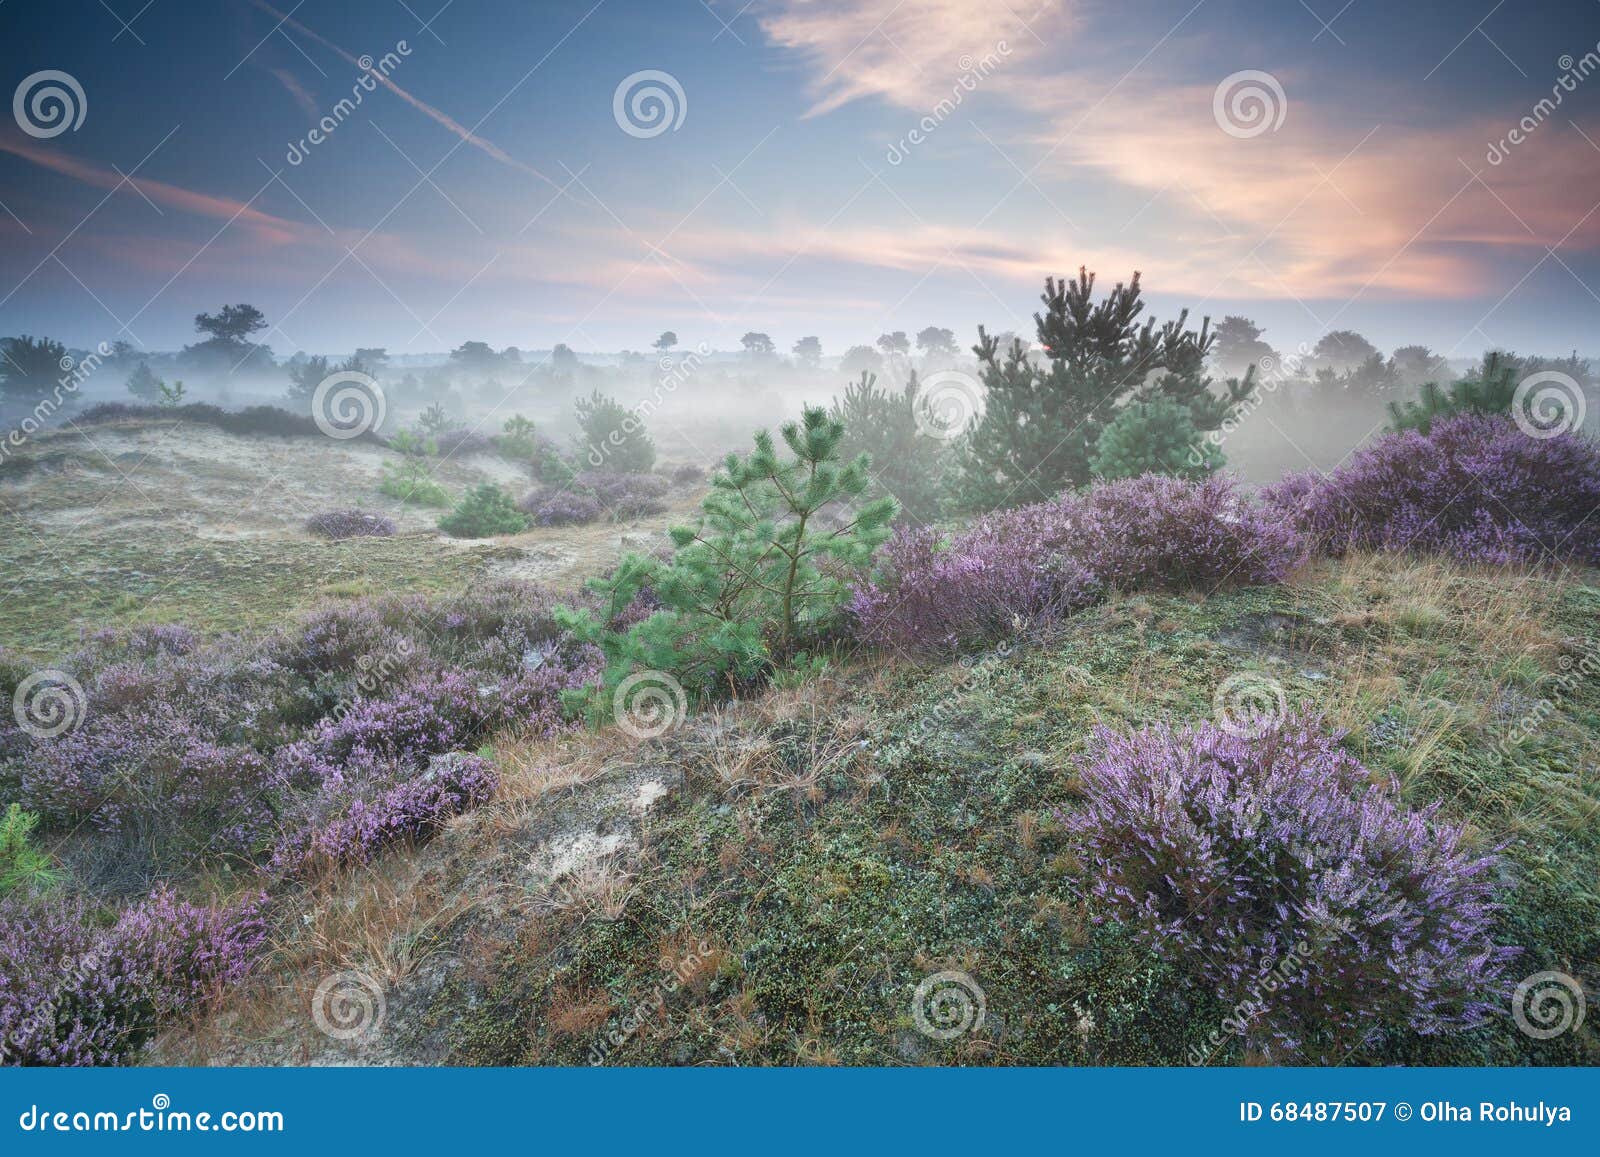 ling flowers on hills in misty morning